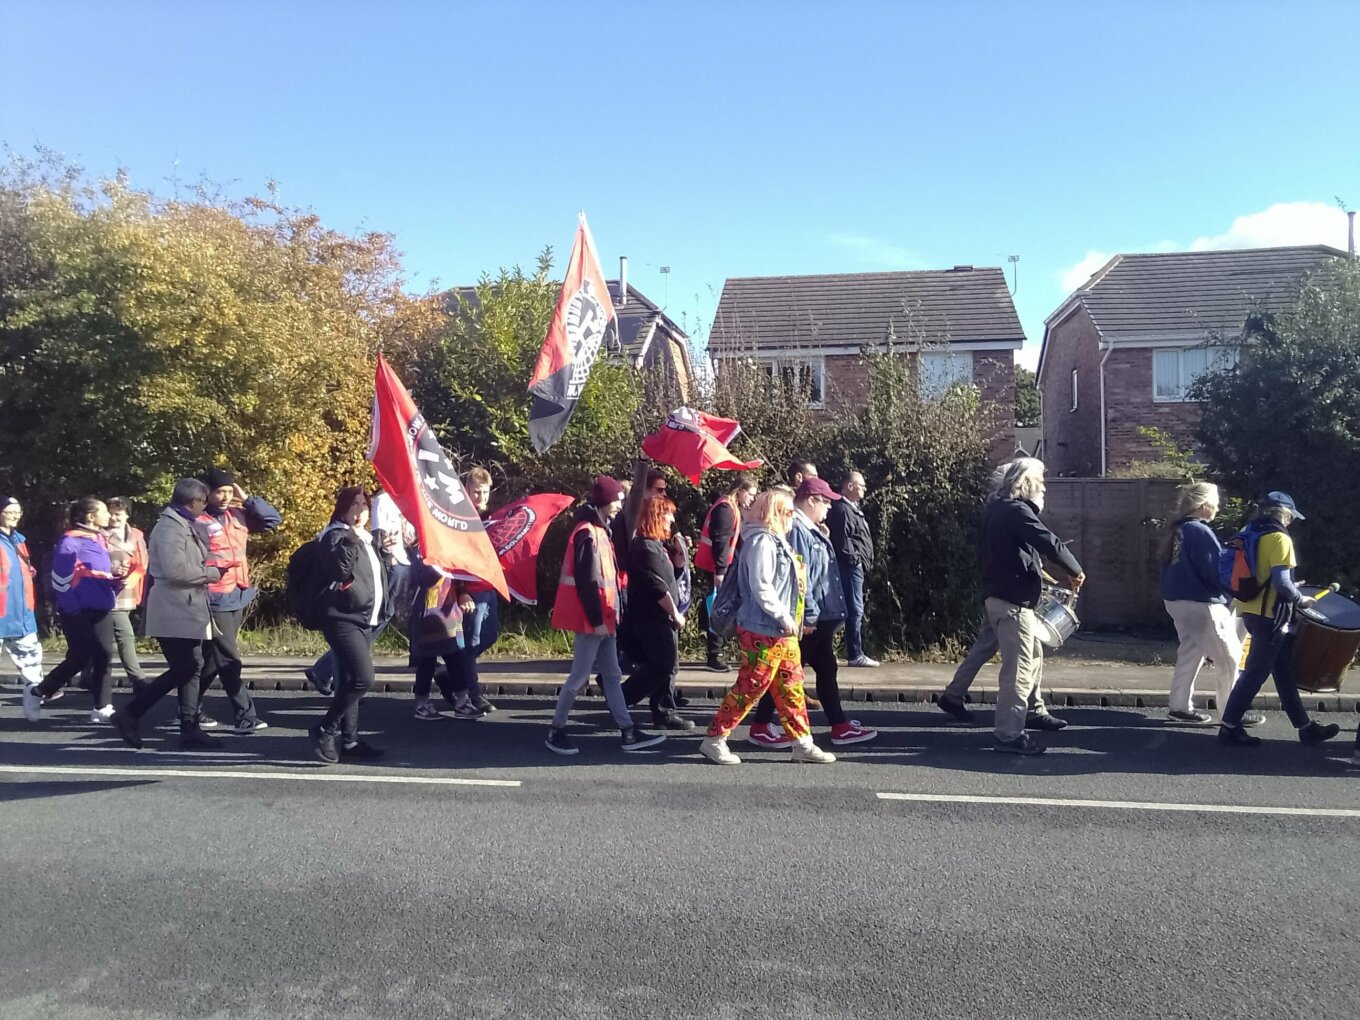 A recent action attended by IWW members